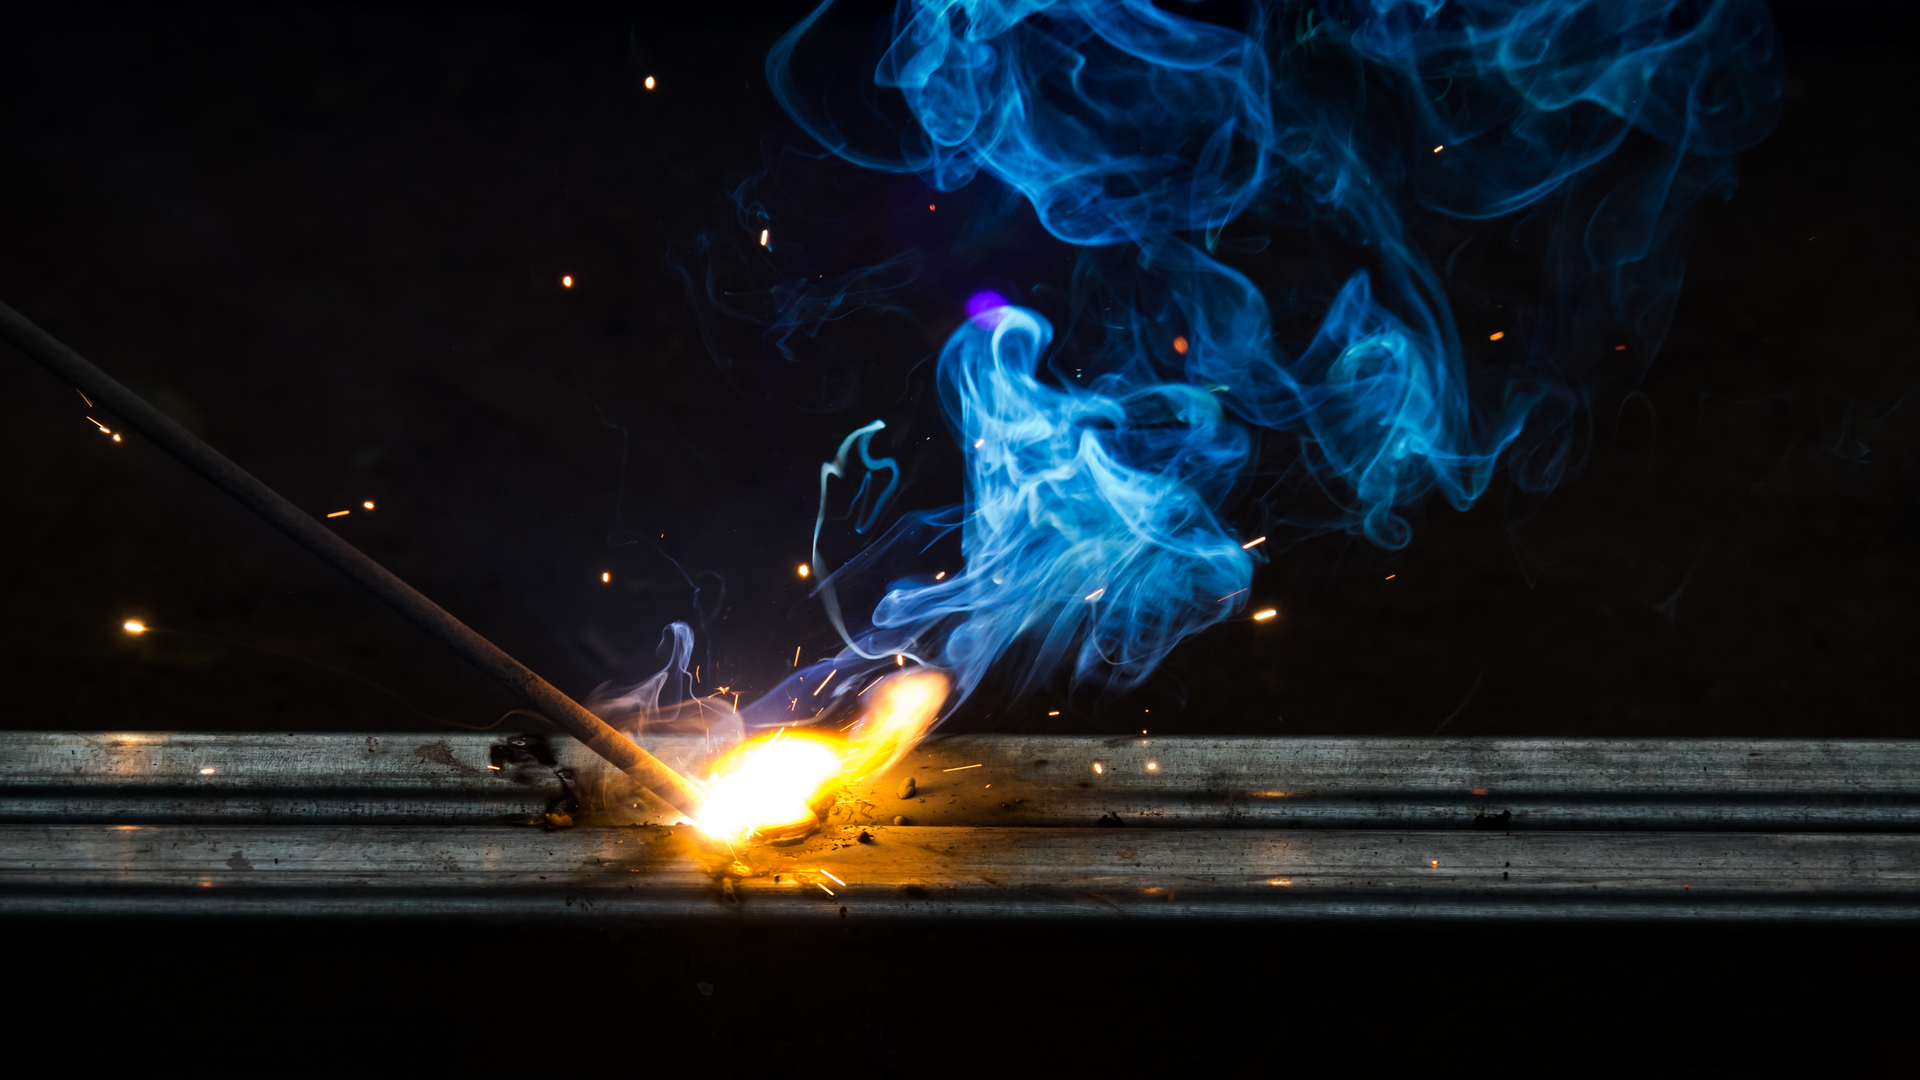 Smoke and flame of welding work on dark background